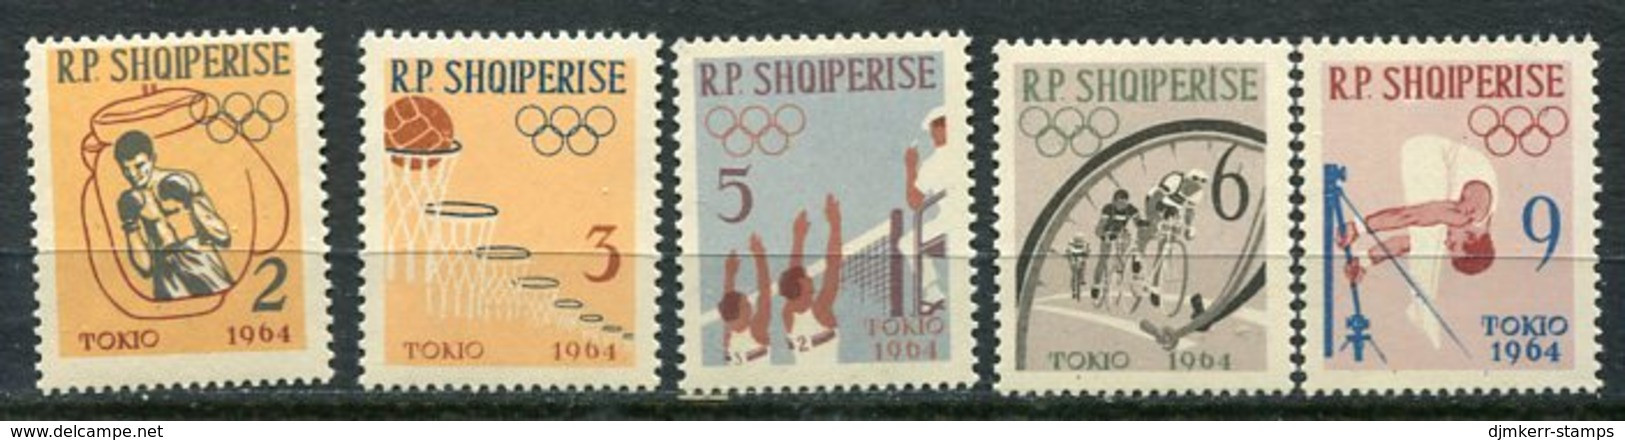 ALBANIA 1963 Olympic Games Perforated Set MNH / **  Michel 747-51A - Albanië